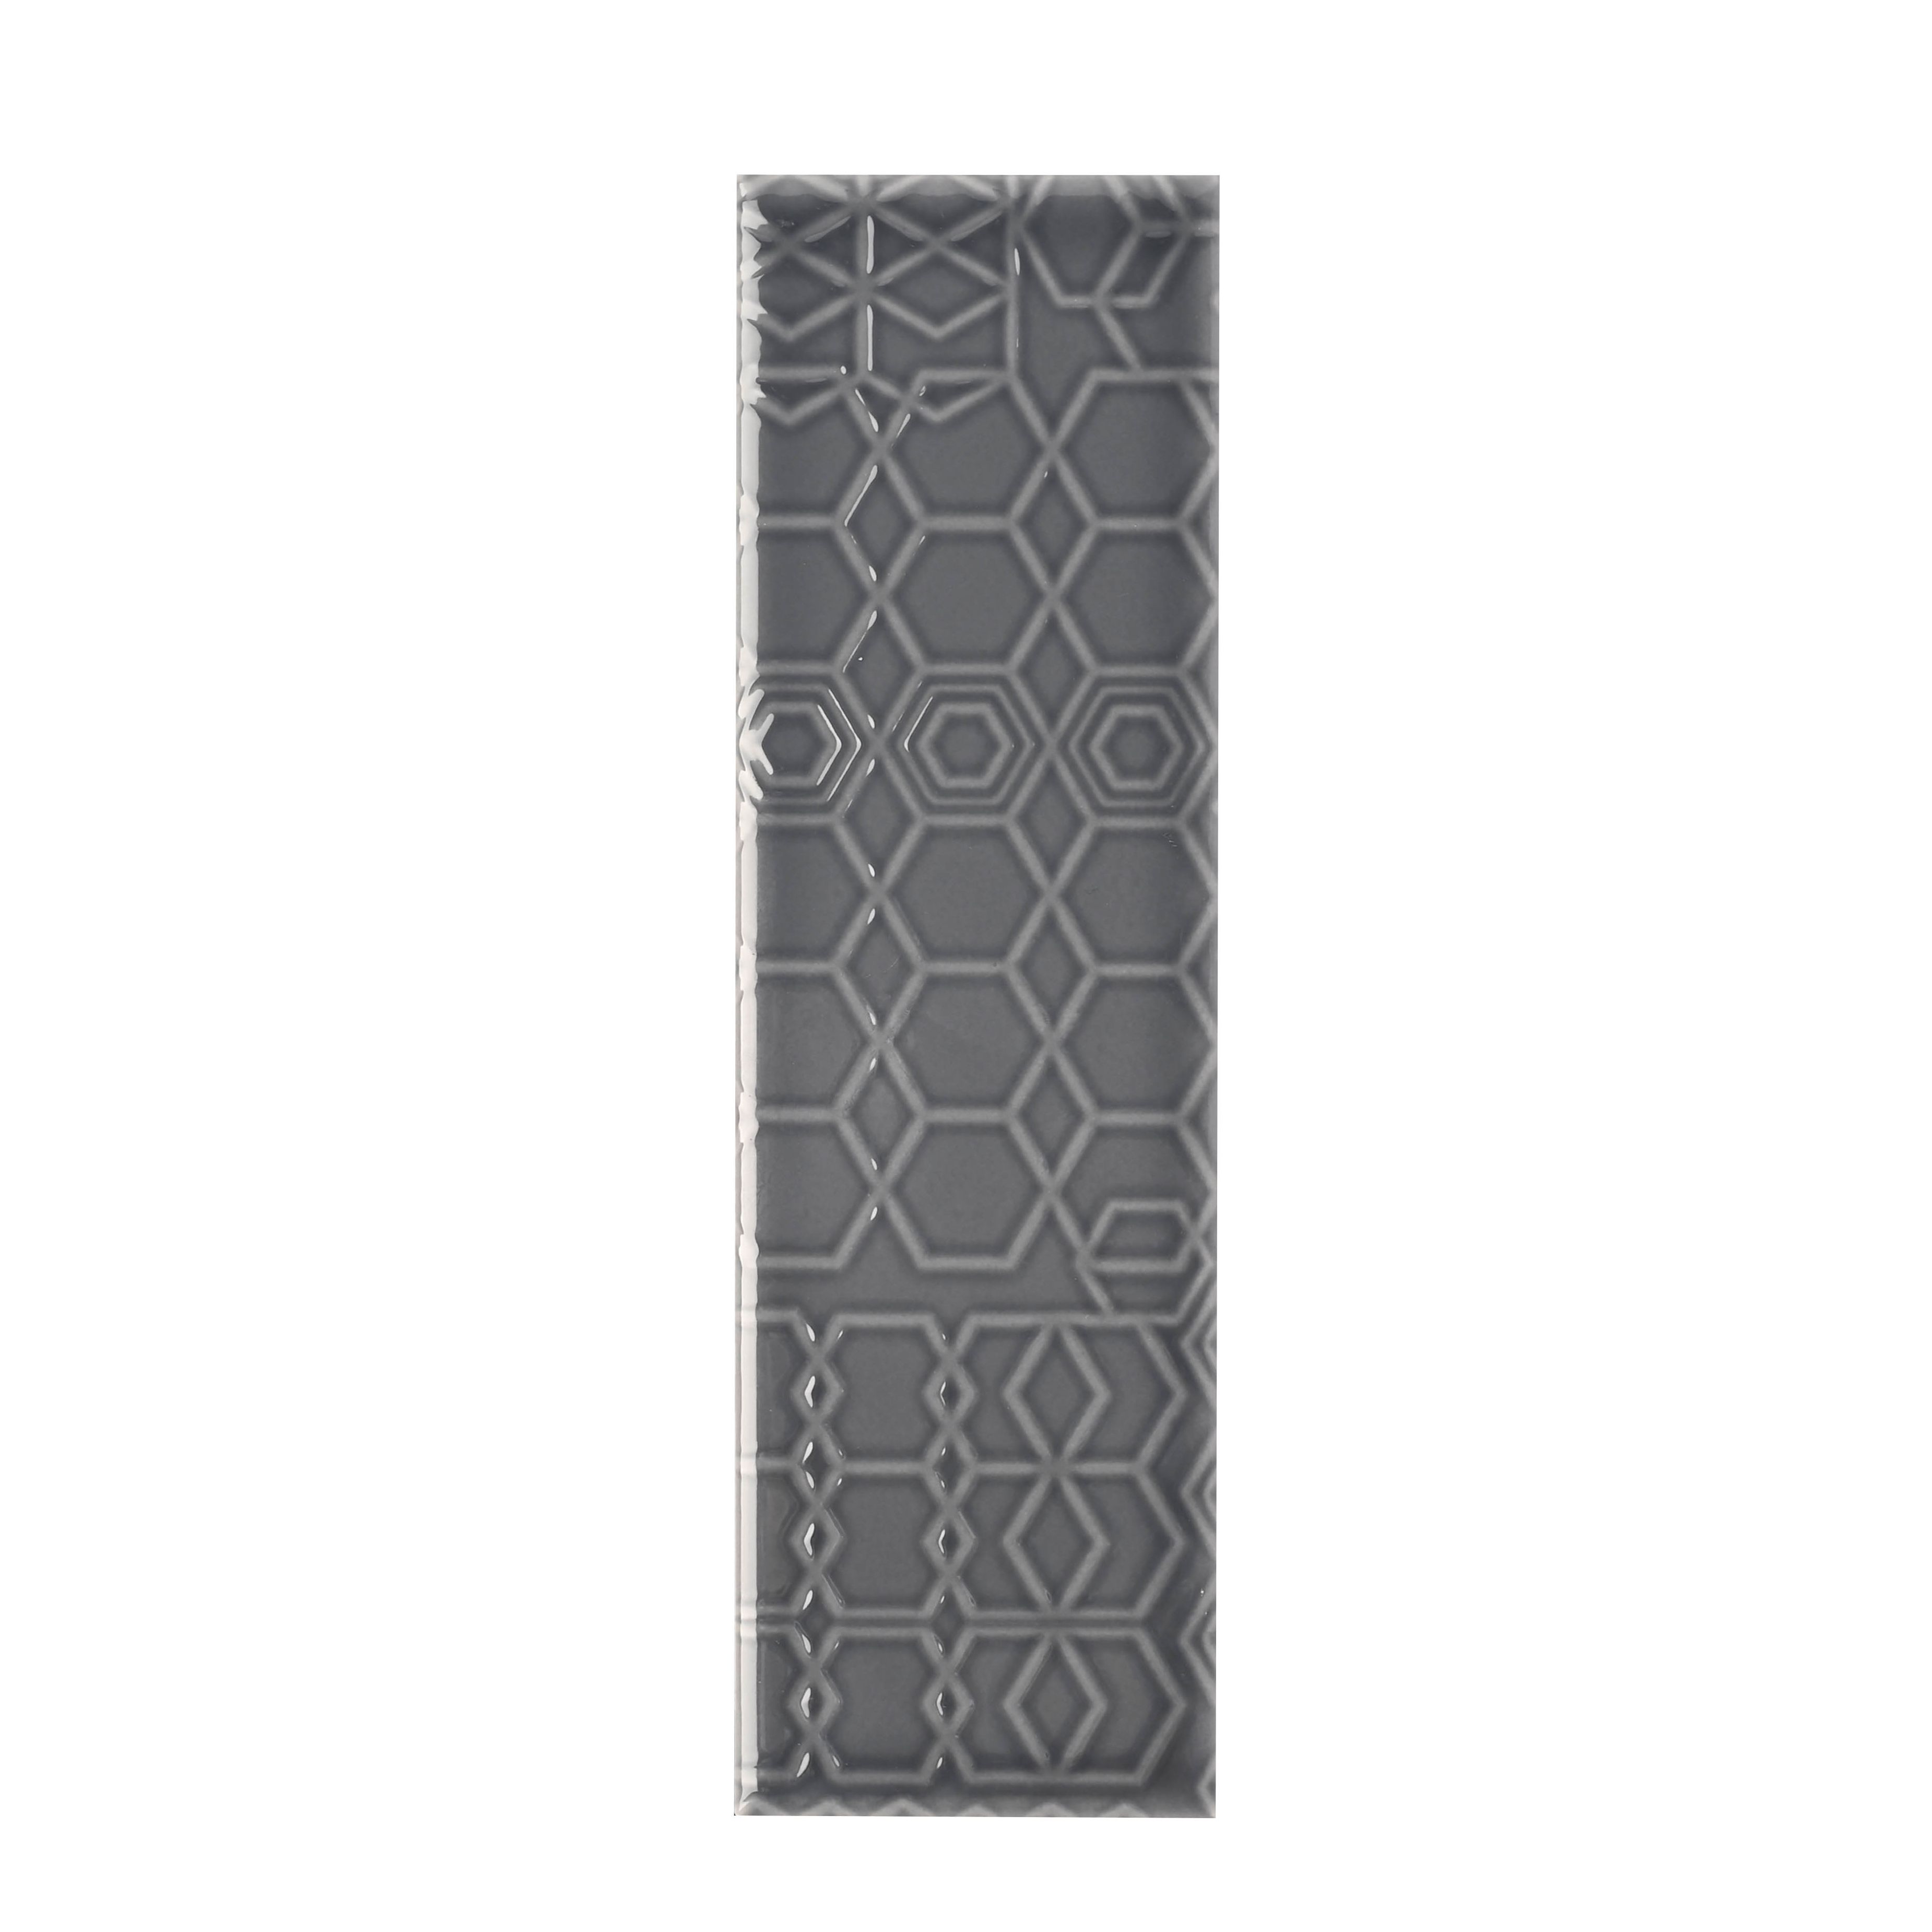 Johnson Tiles Mayfair Grey Gloss Patterned Textured Ceramic Indoor Wall Tile, Pack of 54, (L)245mm (W)75mm